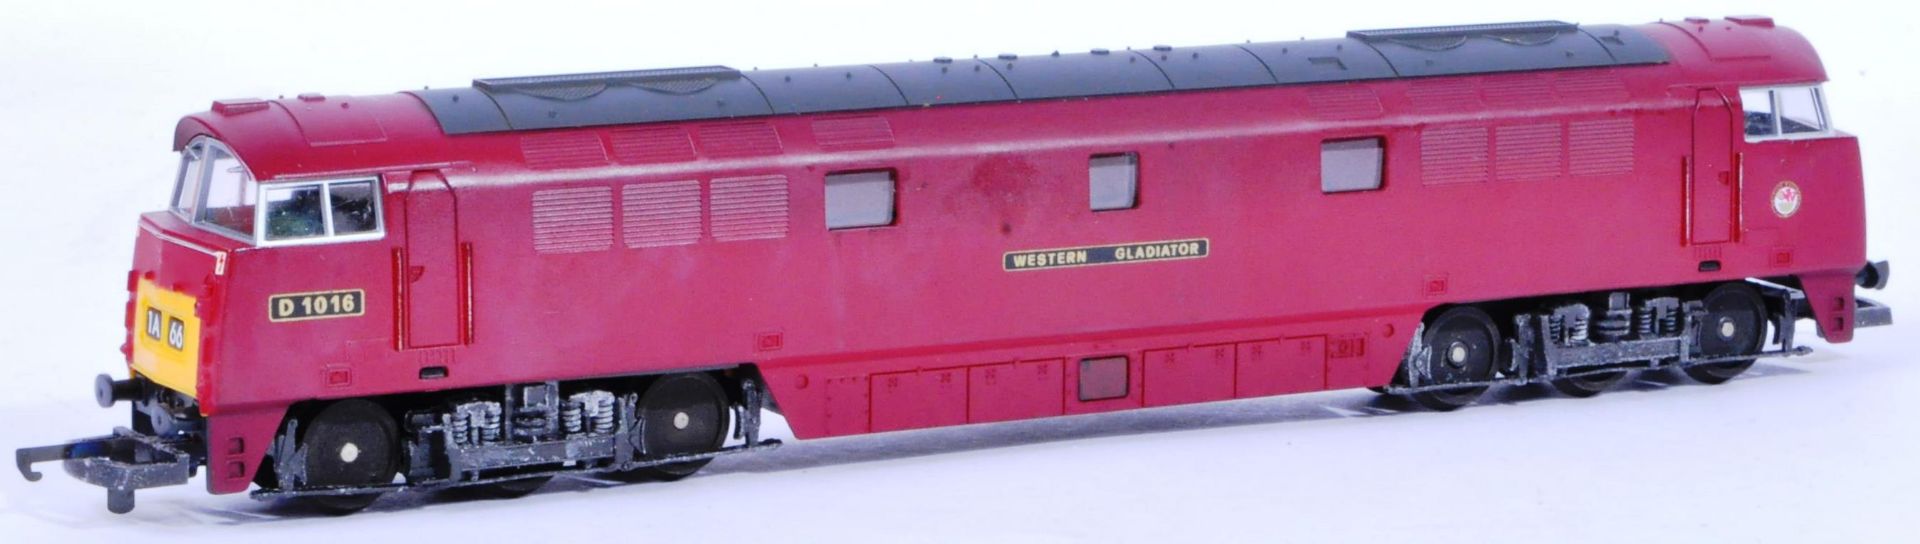 COLLECTION HORNBY 00 GAUGE MODEL RAILWAY DIESEL LOCOS & CARRIAGES - Image 5 of 9